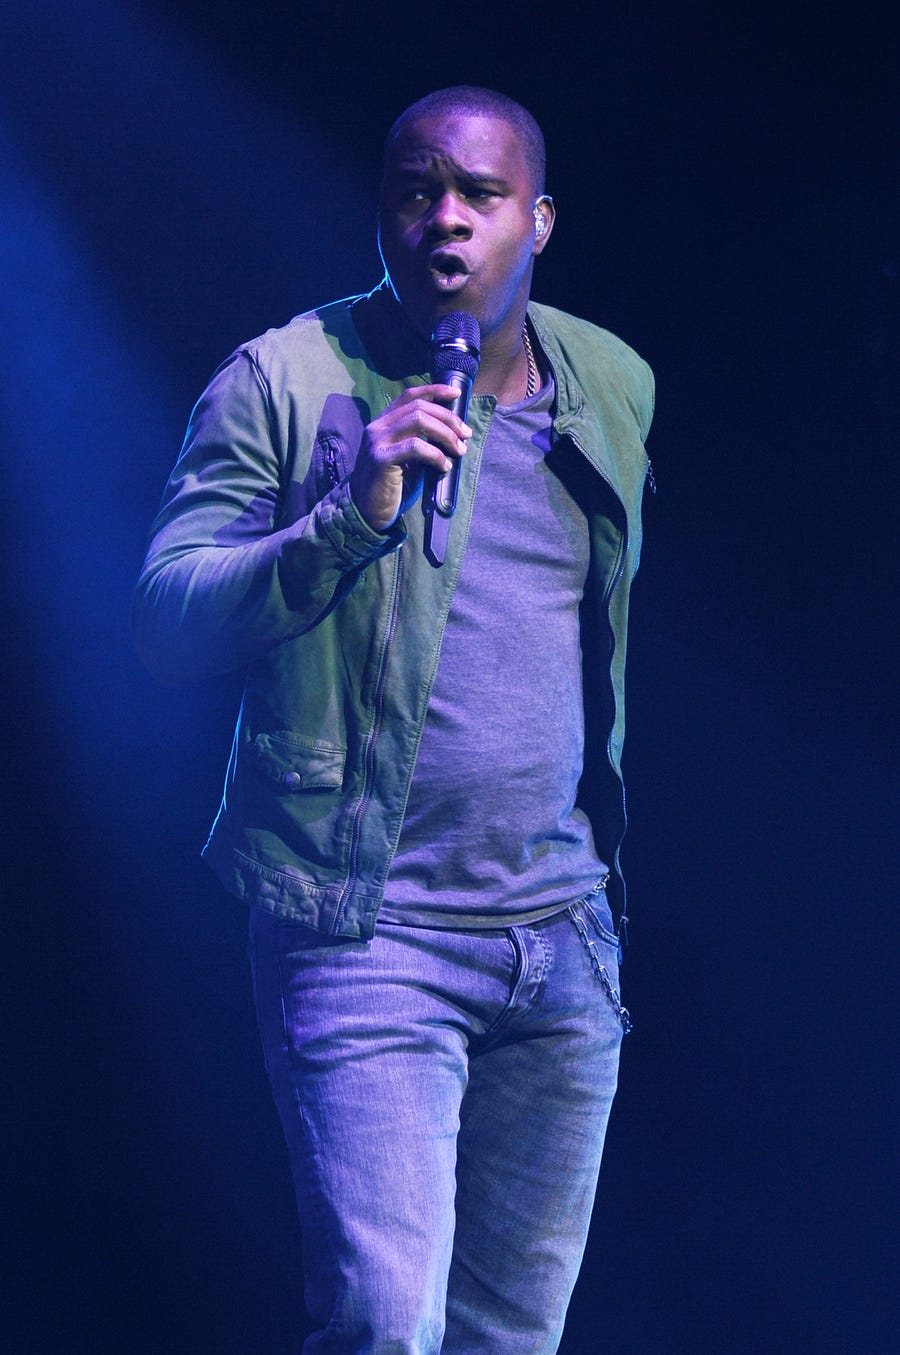 C.J. Harris performs during American Idols Live!  2014 at the Broward Center for the Performing Arts on July 19, 2014 in Ft Lauderdale, Fla.